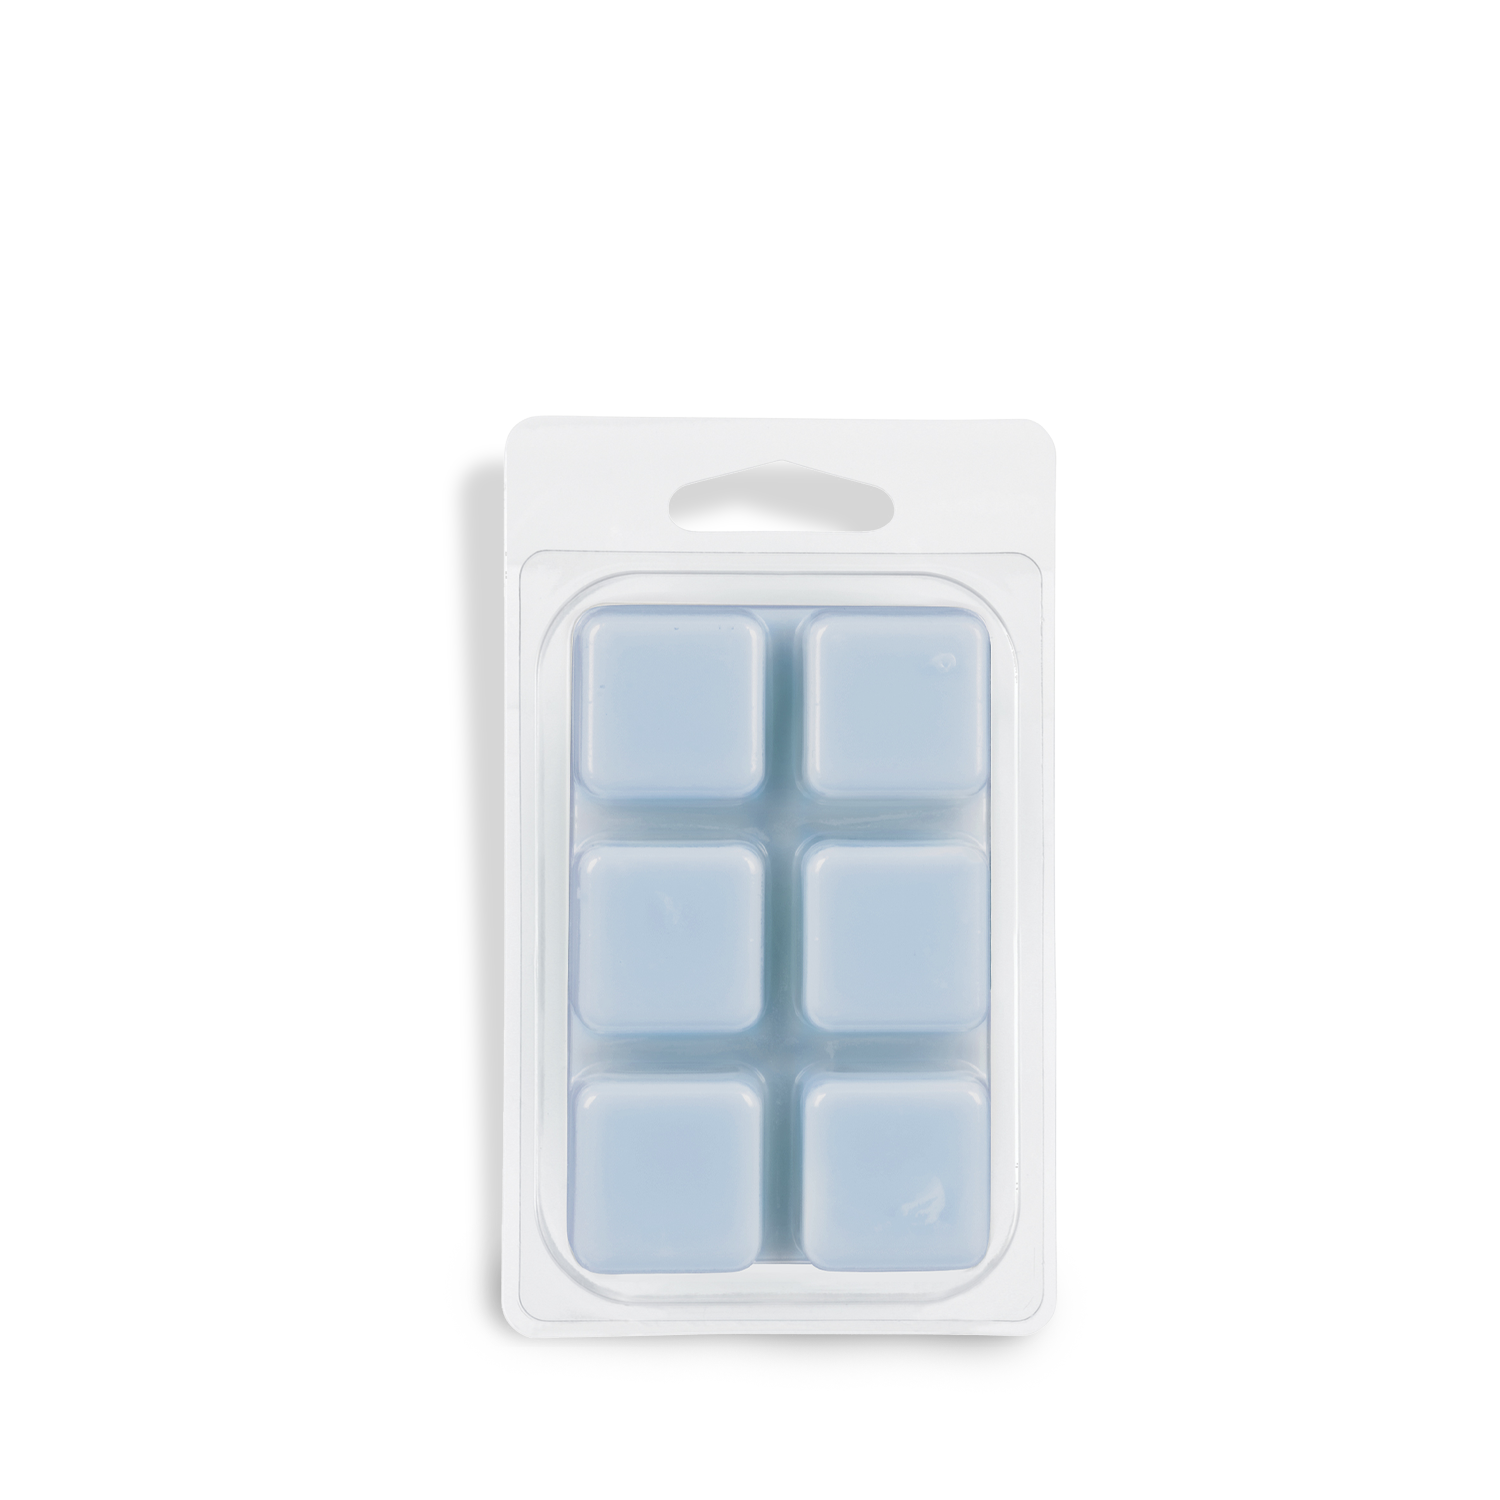 A pack of blue Tuscany Candle® EVD Vanilla Sea Salt Scented Wax Melt (2.5 oz) cubes on a white background.